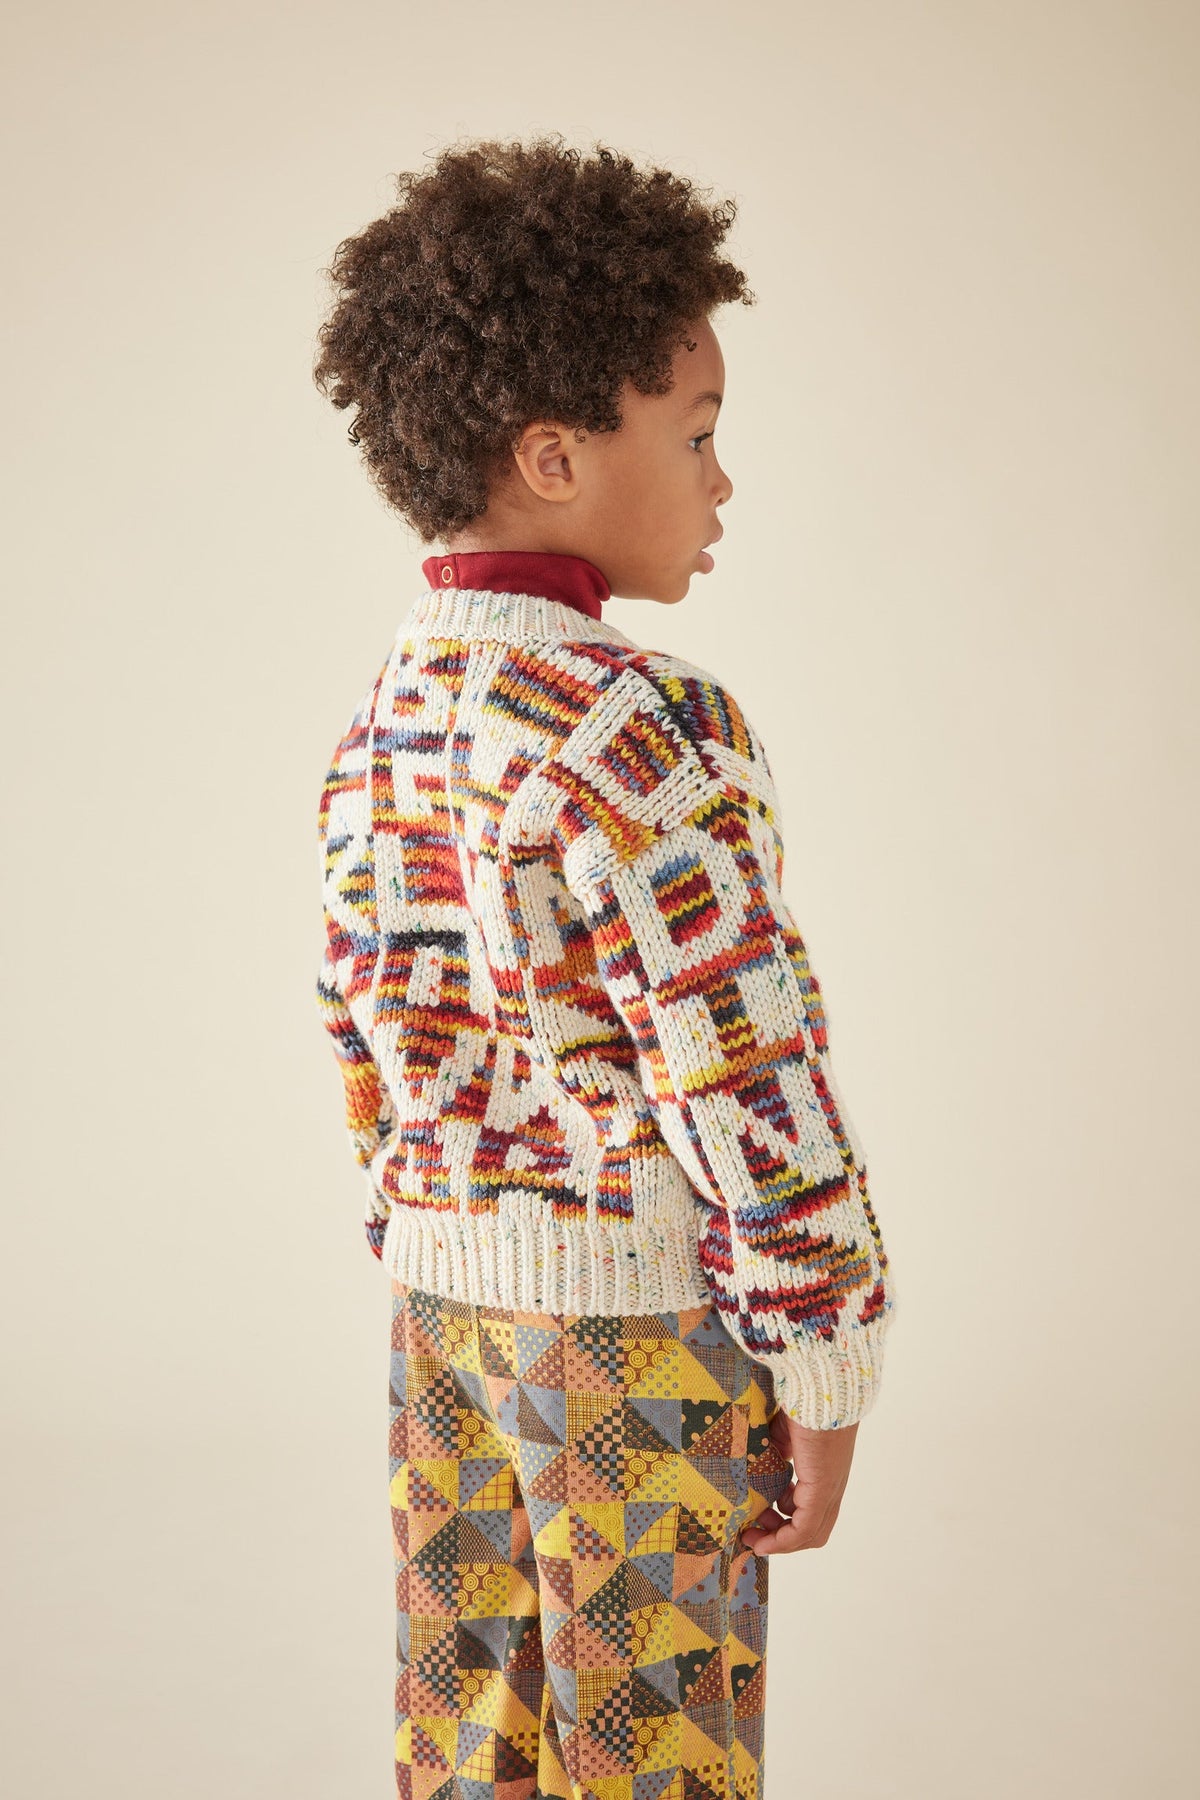 Alphabet Intarsia Sweater - Prime Confetti+Model is 45 inches tall, 46lbs, wearing a size 6-7y